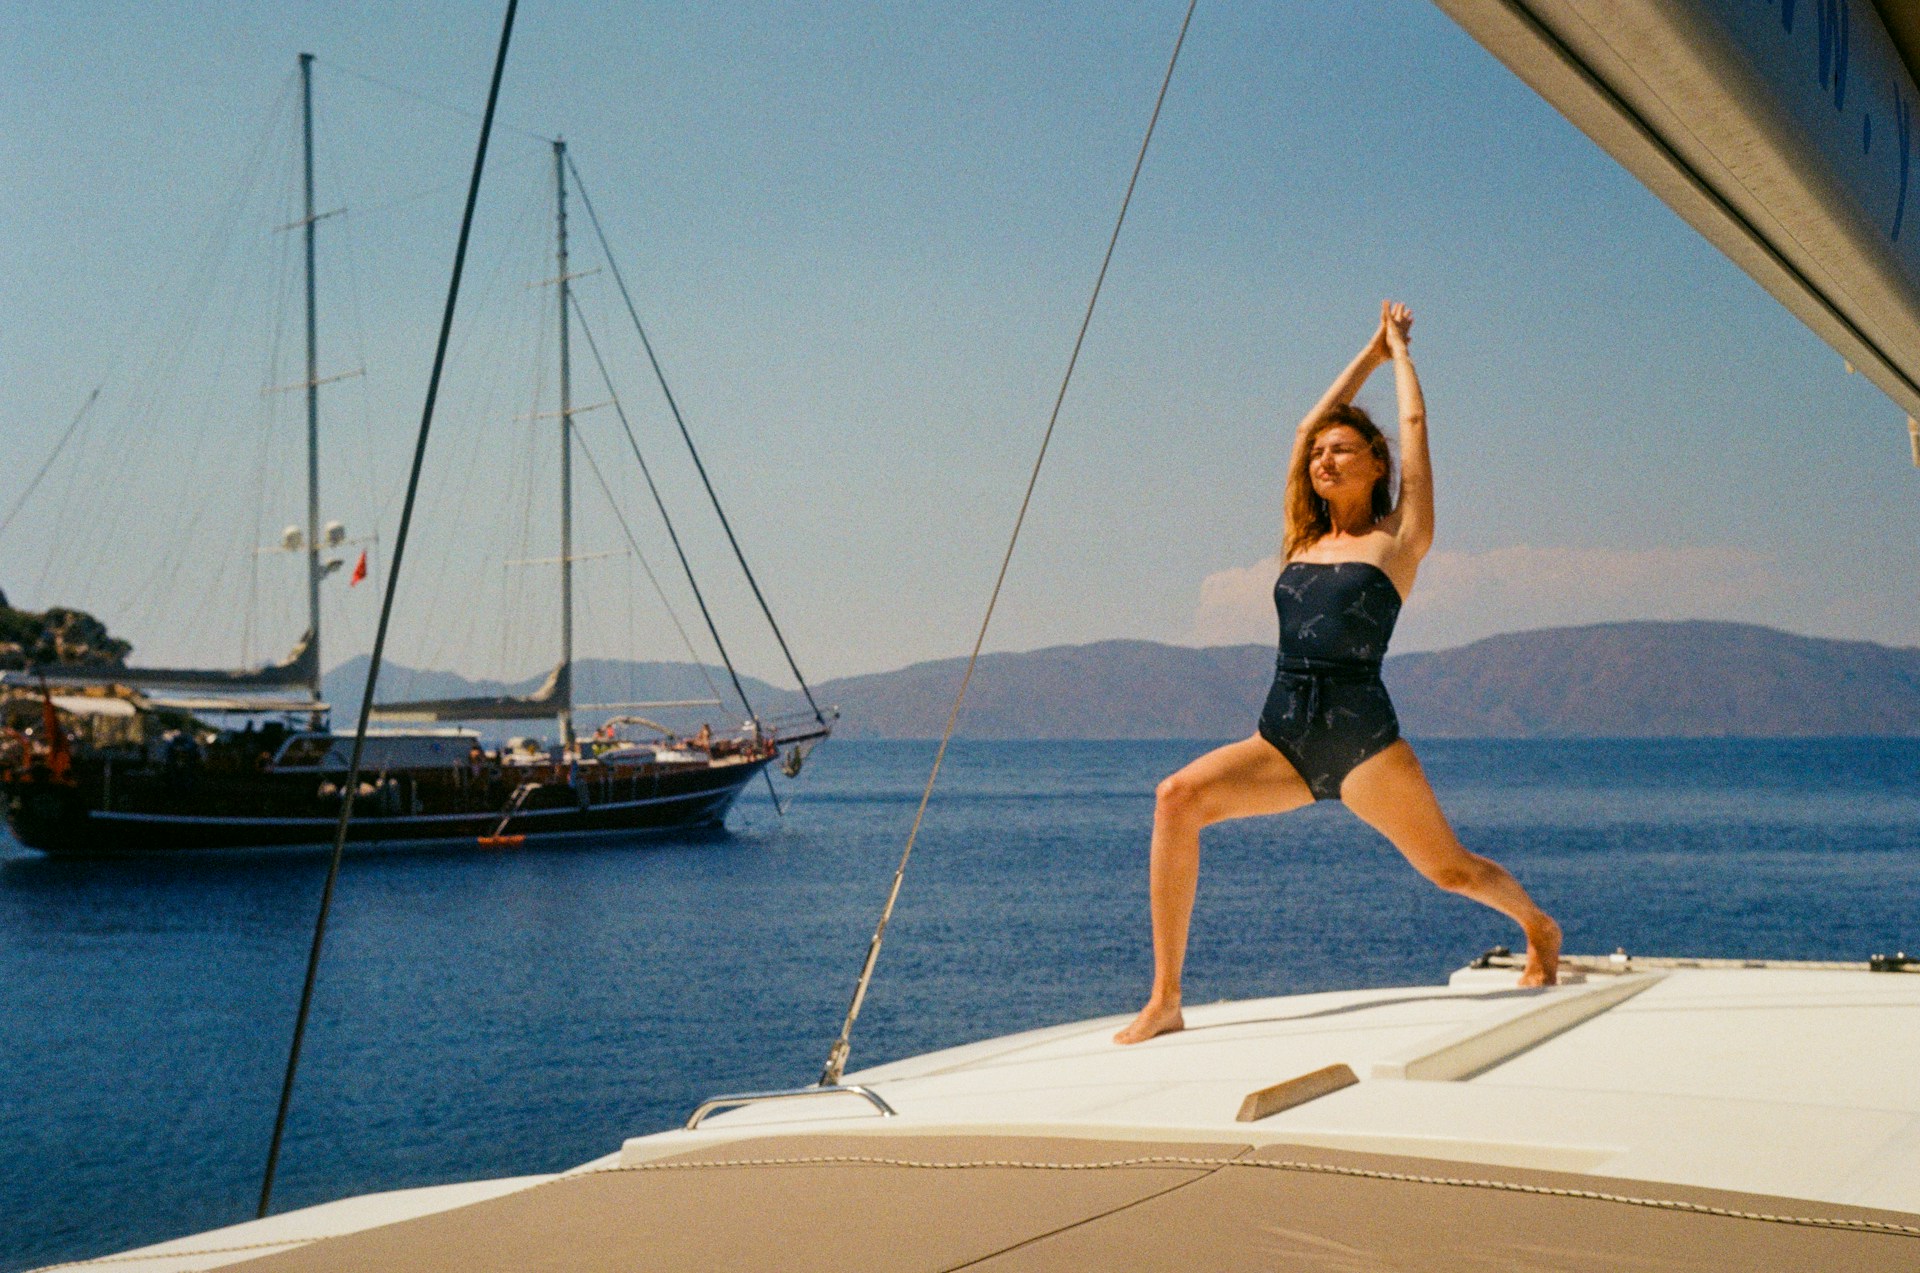 Sailing & Wellness: Staying healthy and fit while living the sailing lifestyle